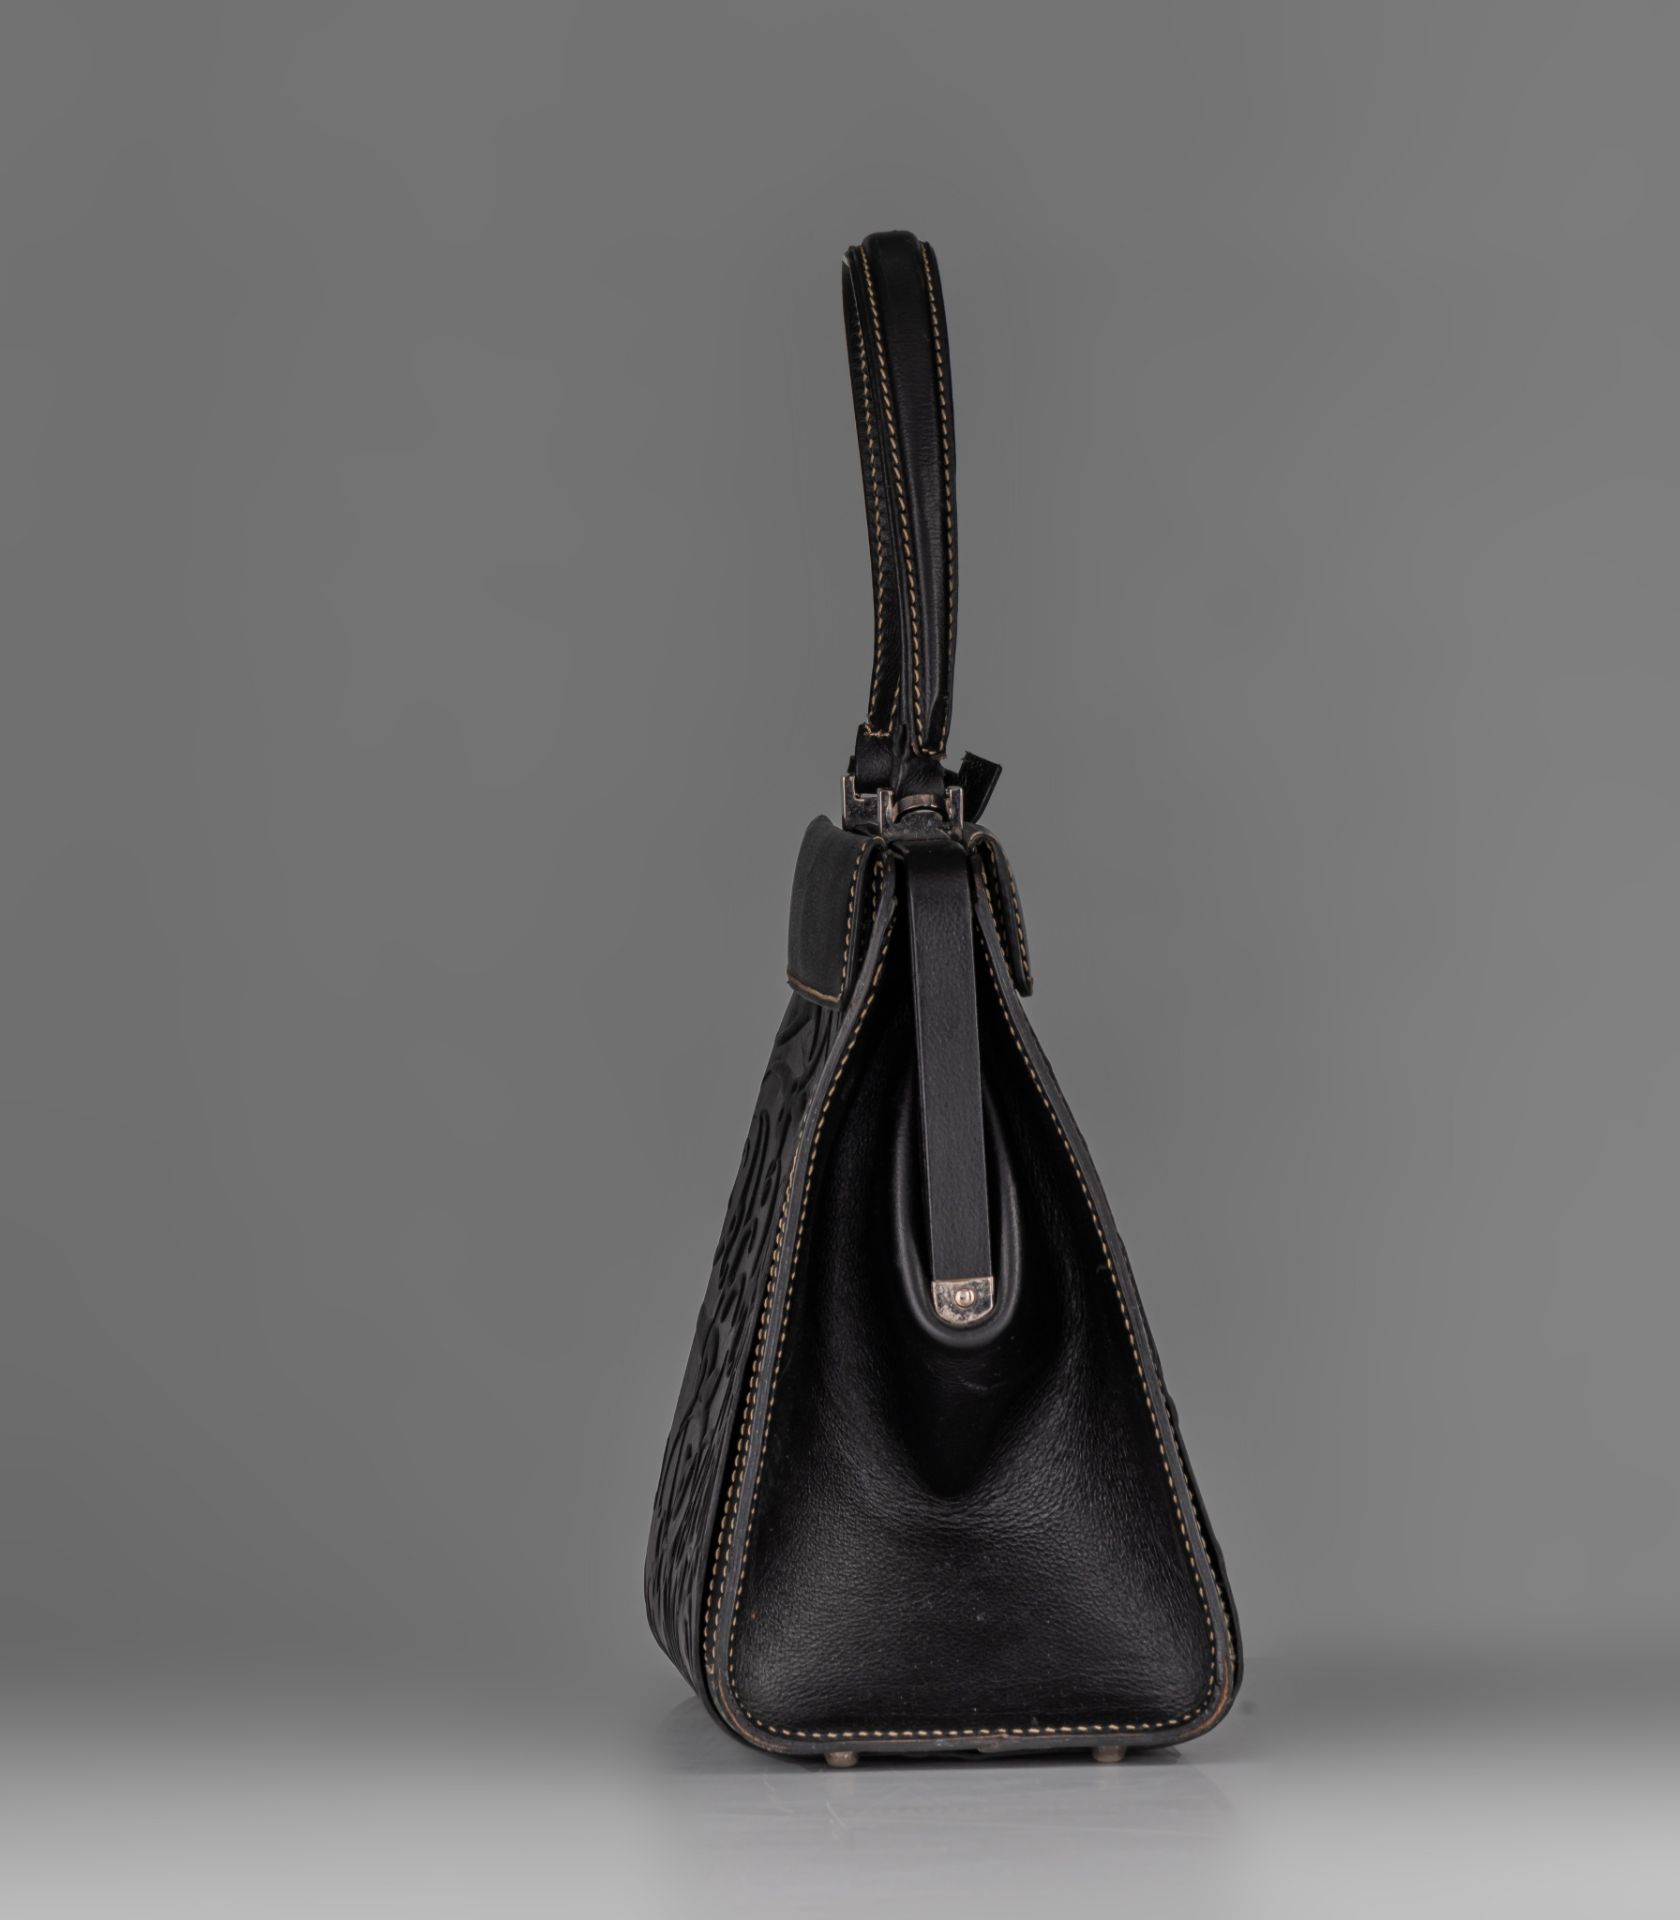 A Delvaux 'Jumping Illusion' handbag in black leather, with adjustable covers - Image 5 of 15